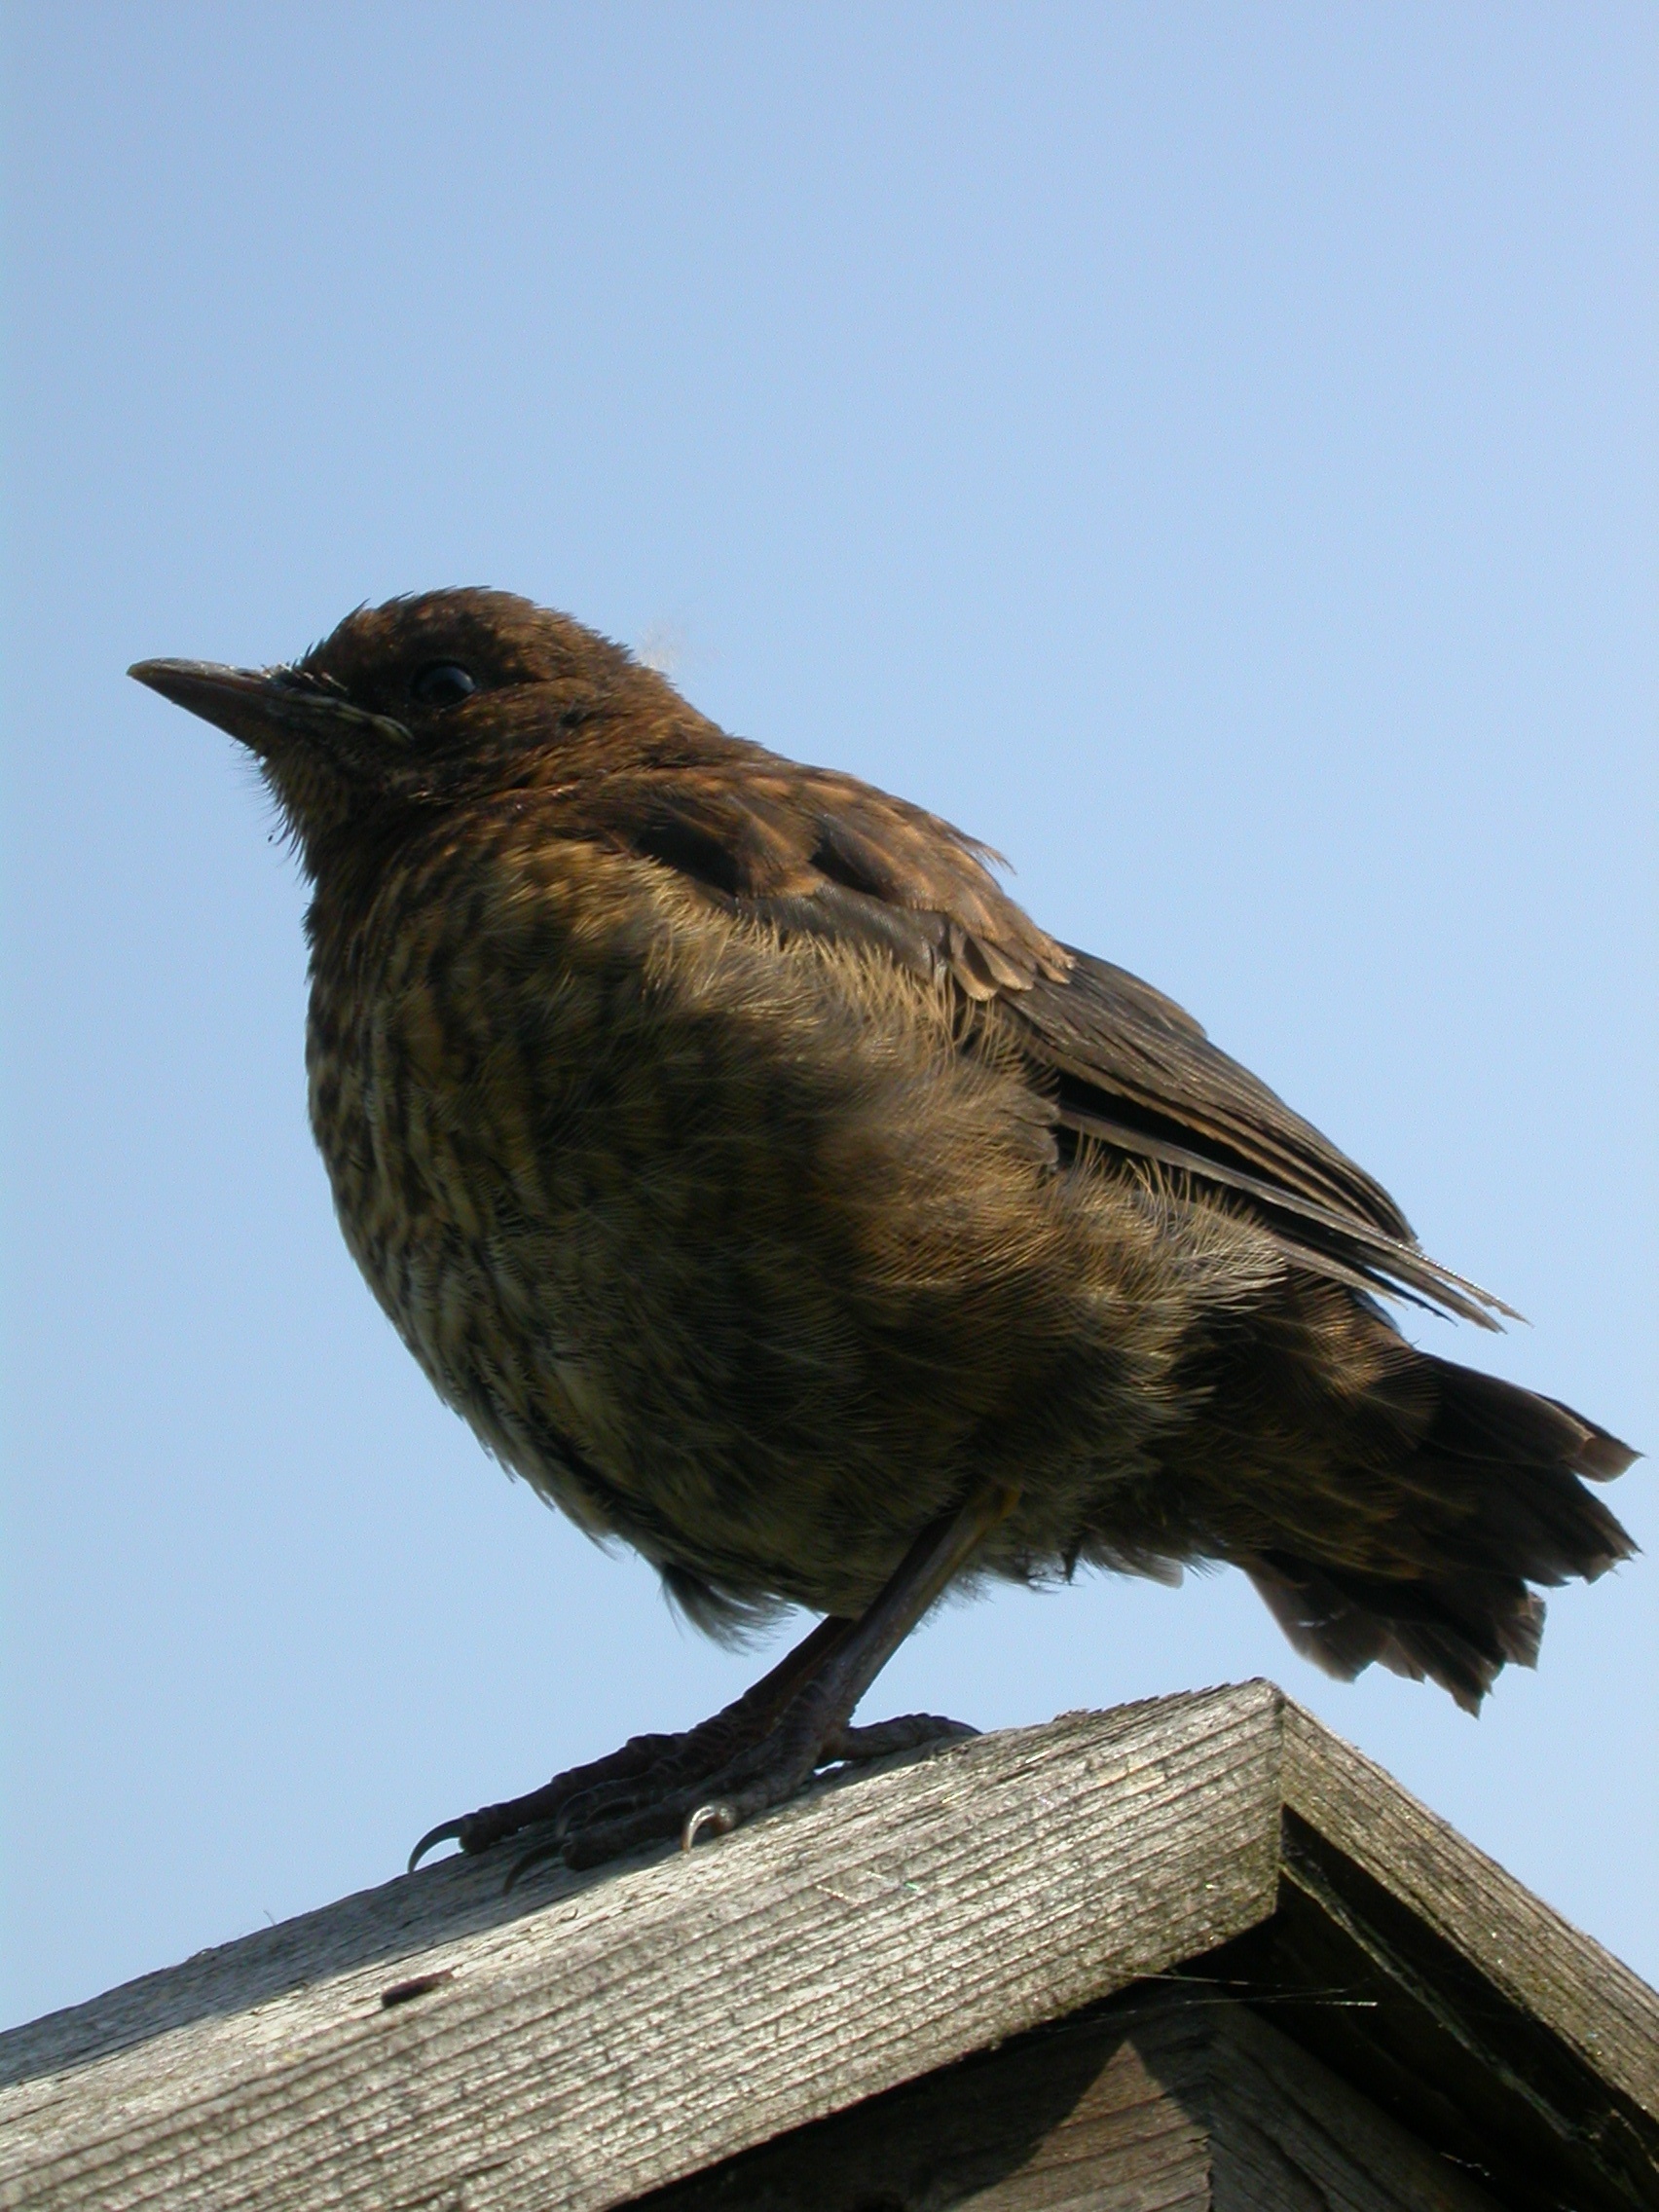 paul blackbird on roof feathers fluffy young bird flying